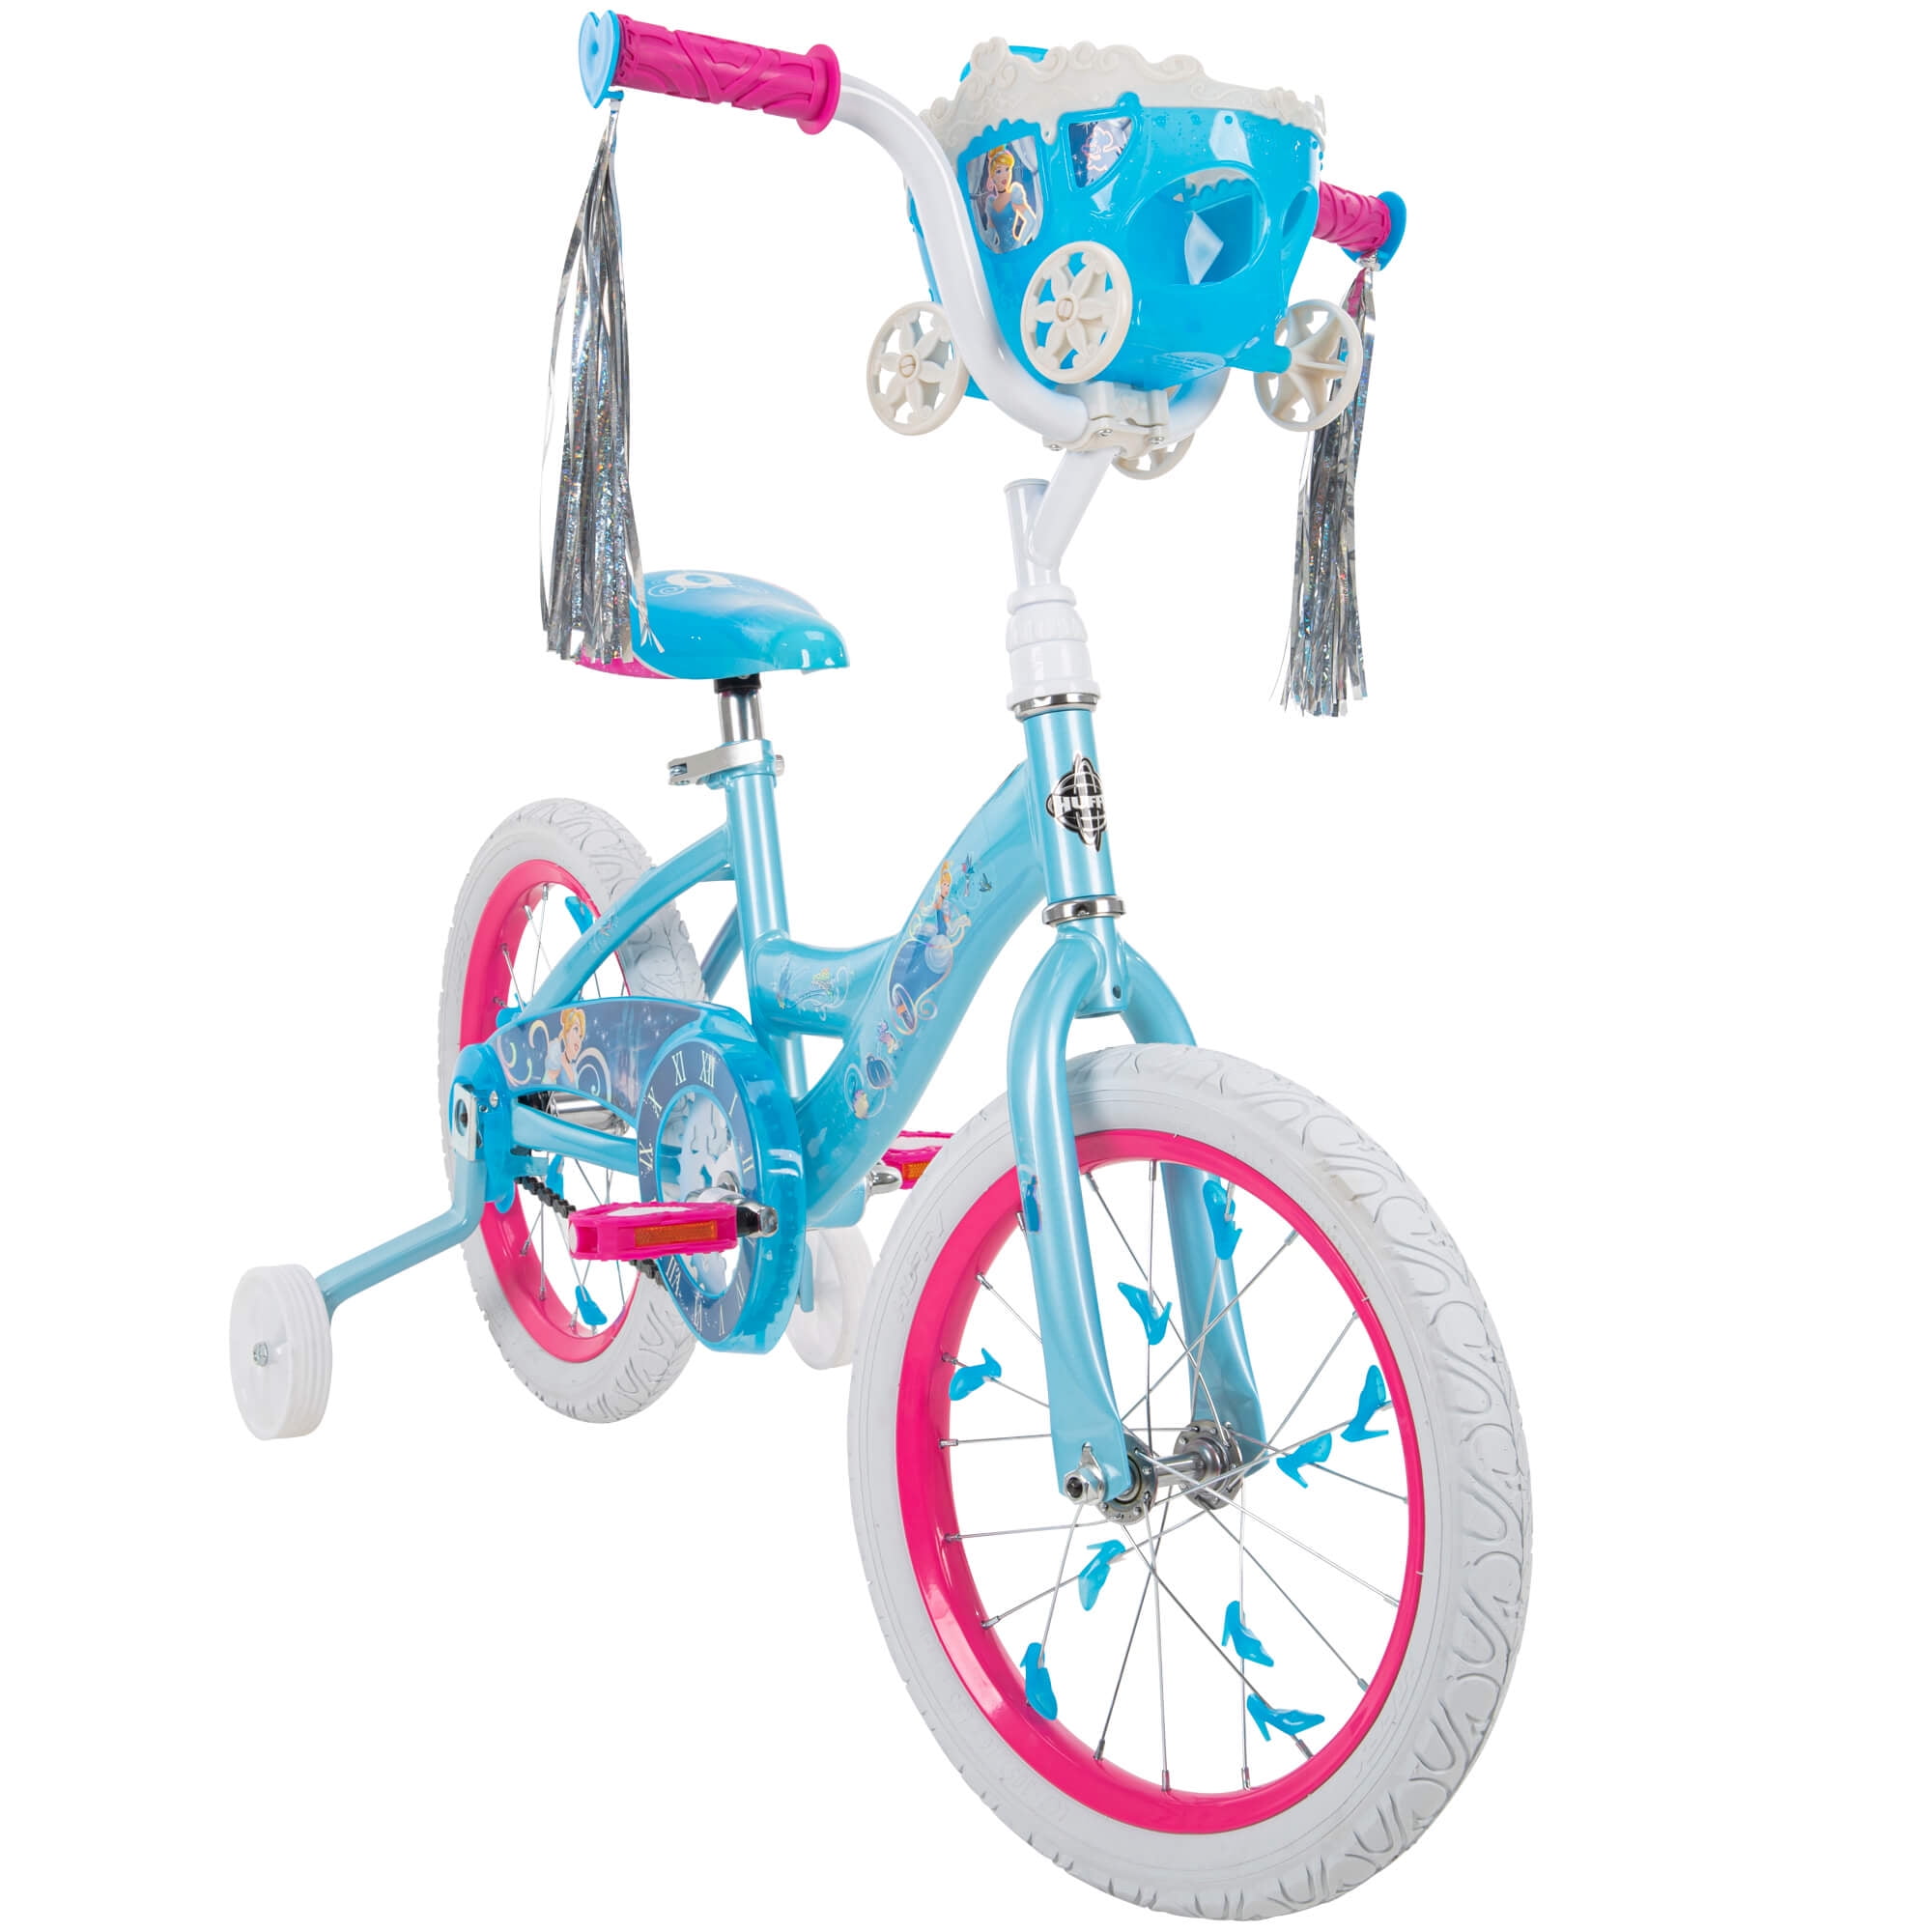 Disney Princess 16 In. Cinderella Girl's Bike with Doll Carrier, Huffy, Blue